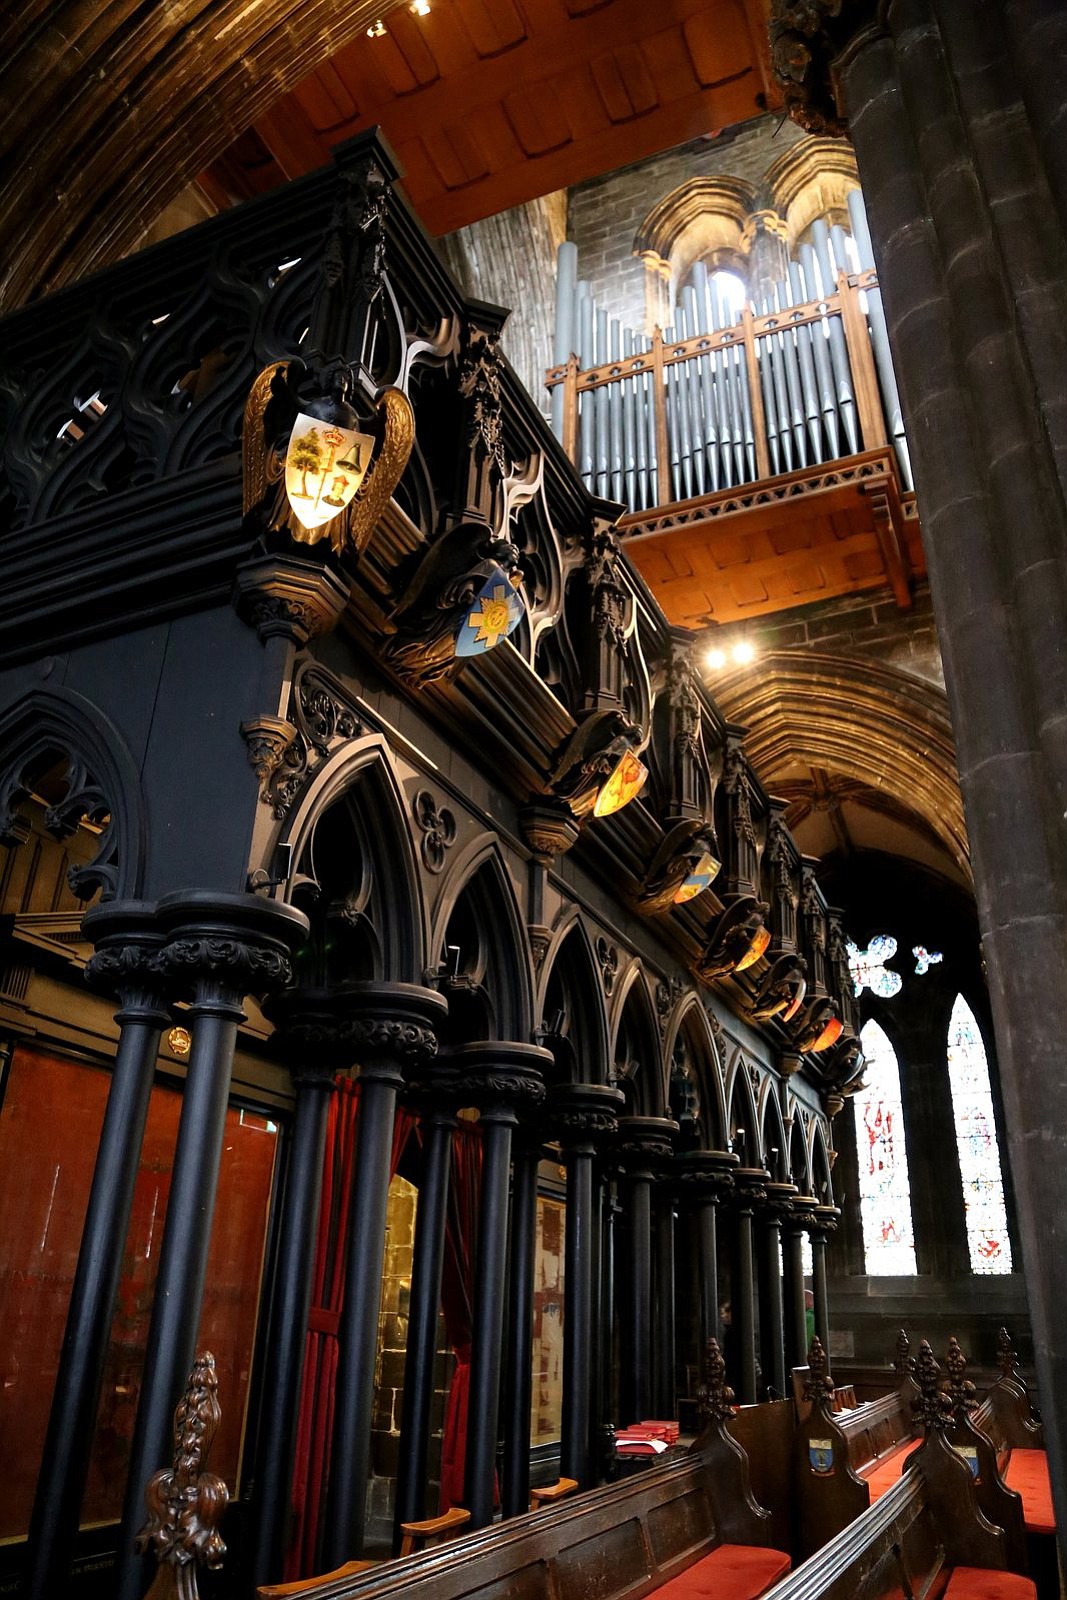 The pipe organ and choir gallery appear at Glasgow Cathedral in Glasgow, Scotland.